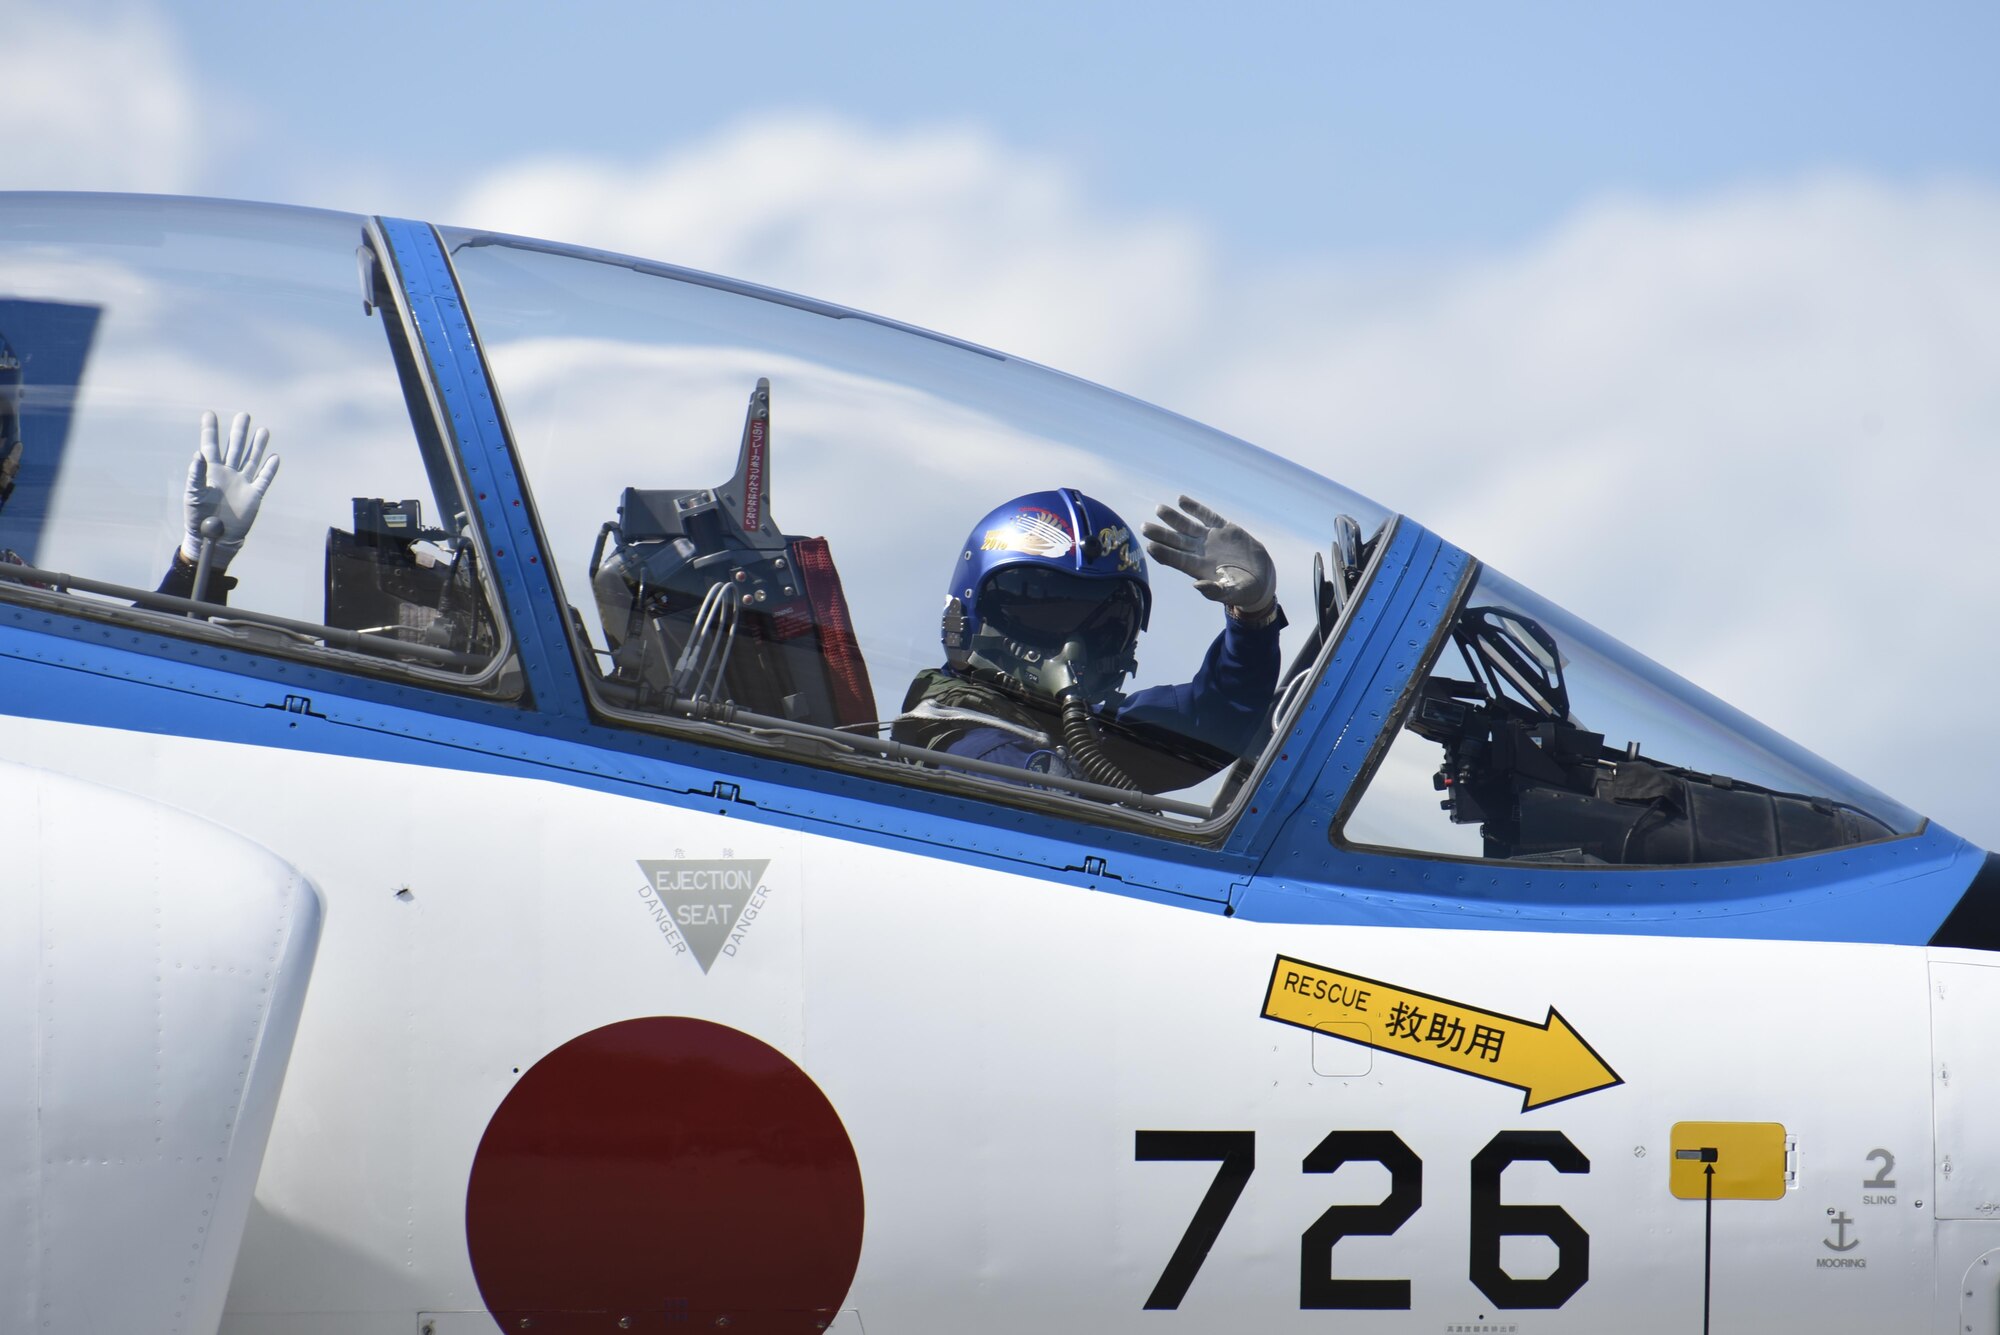 A pair of Blue Impulse pilots wave to the crowd during Misawa Air Fest 2016 at Misawa Air Base, Japan, Sept. 11, 2016. During the air show, attendees saw flying demonstrations of the F-15J, F-2, CH-47 Chinook, U-125 and a UH-60 Black Hawk. (U.S. Air Force photo by Airman 1st Class Sadie Colbert)